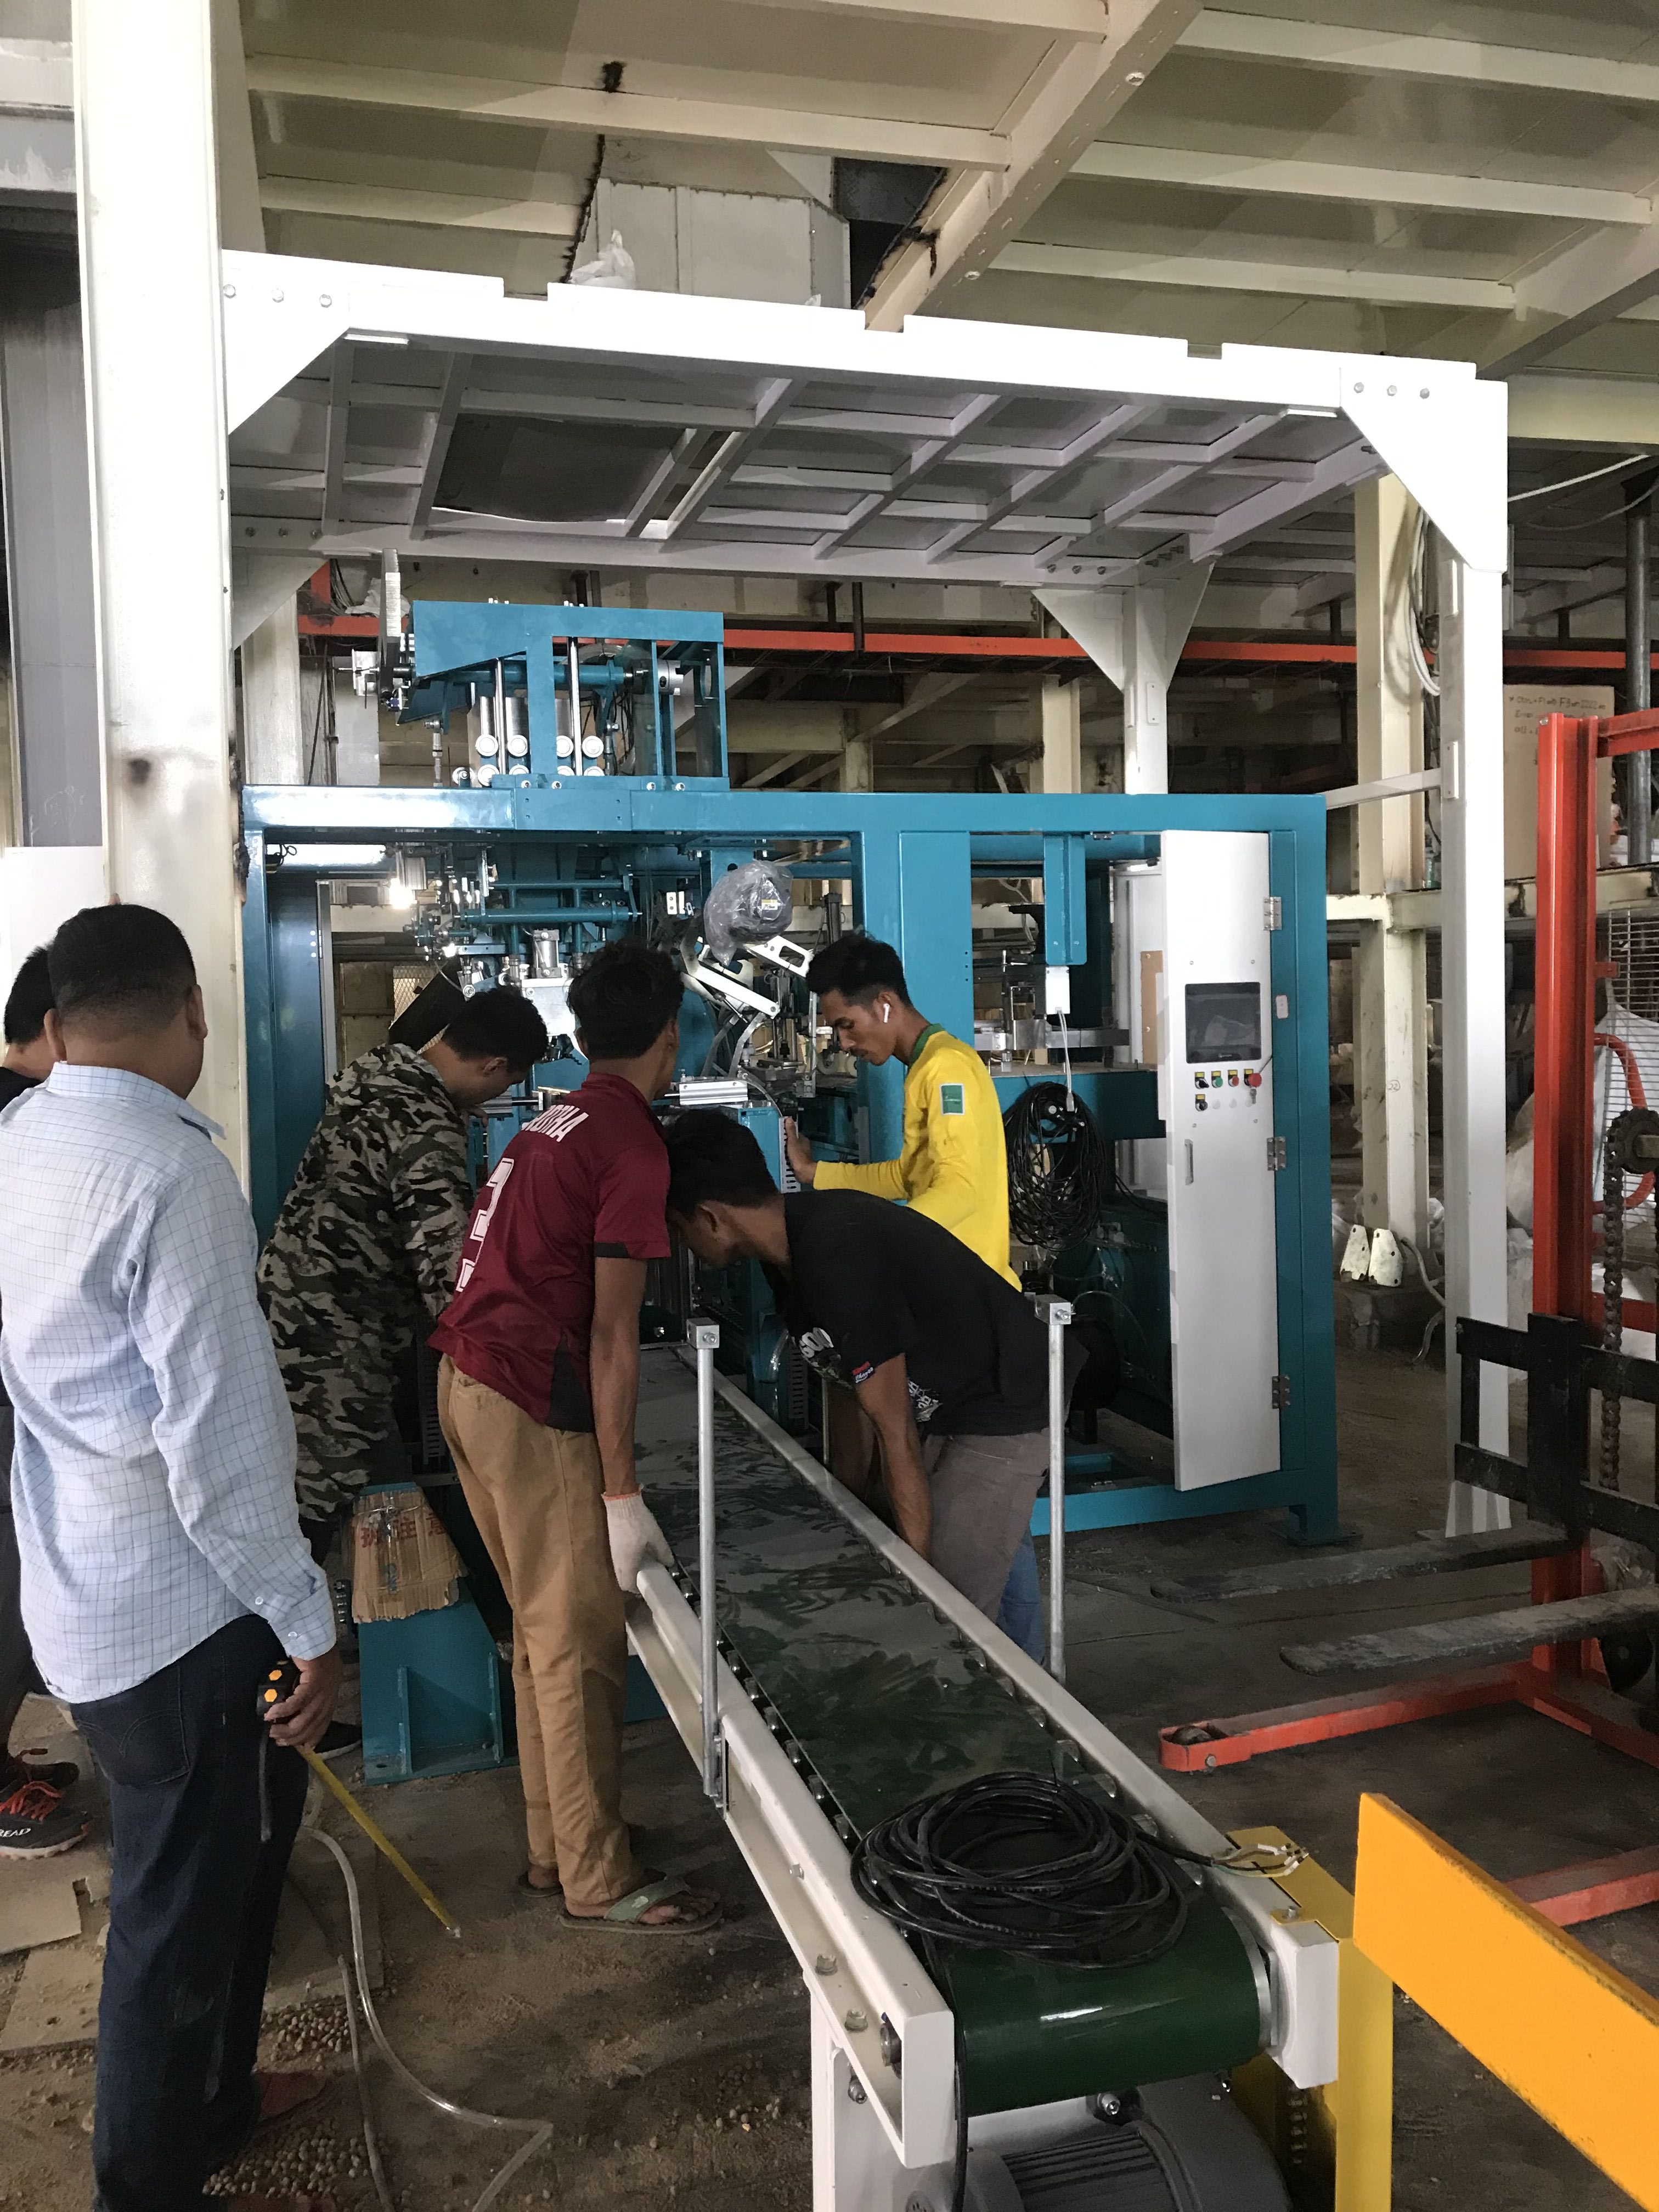 MOBILE BAGGING MACHINES containerized bagging system Containerised bagging system Mobile Bagging Unit MOBILE BAGGING MACHINES for Grains, pulses, iodised salts, sugar